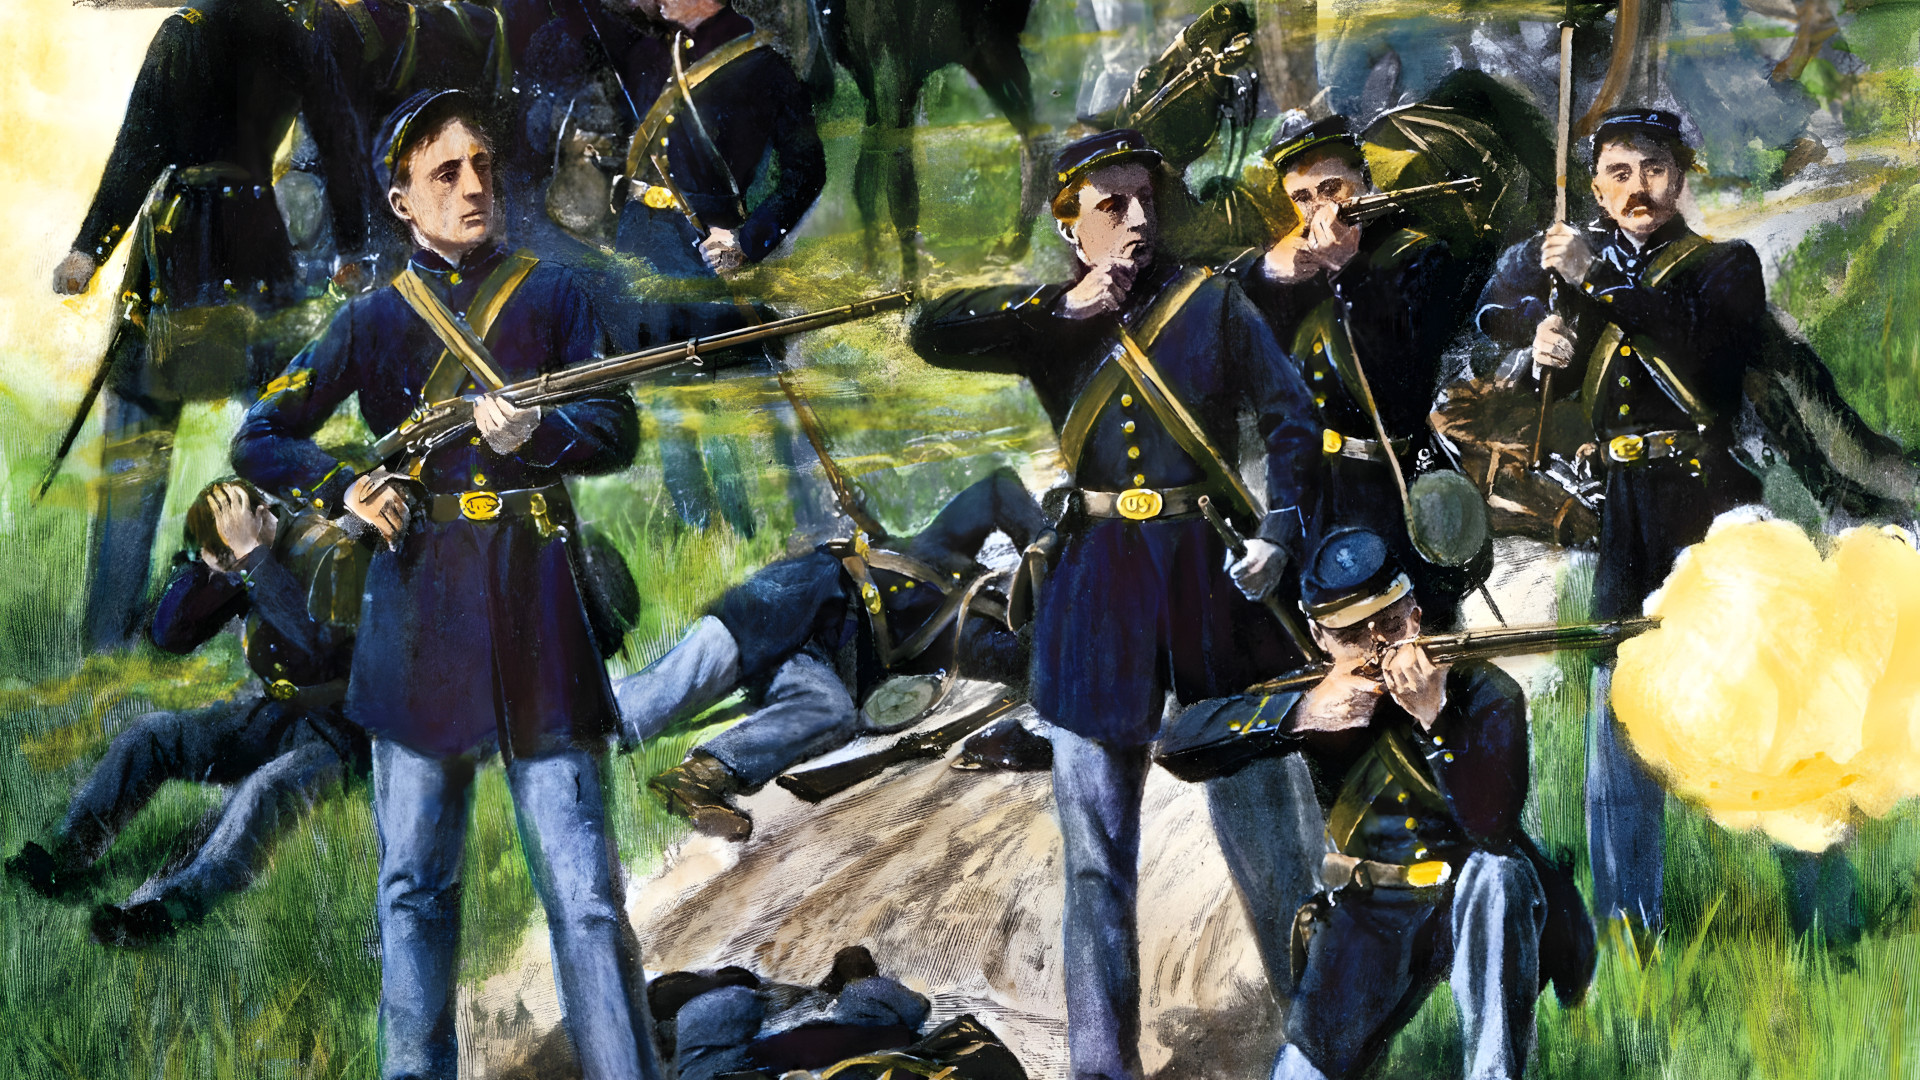 Union soldiers hold the line in the woods behind Boatswain’s Creek at Gaines' Mill. When the Confederates punched through the Union line, Butterfield seized the colors of the 83rd Pennsylvania and waved them aloft to rally his troops.